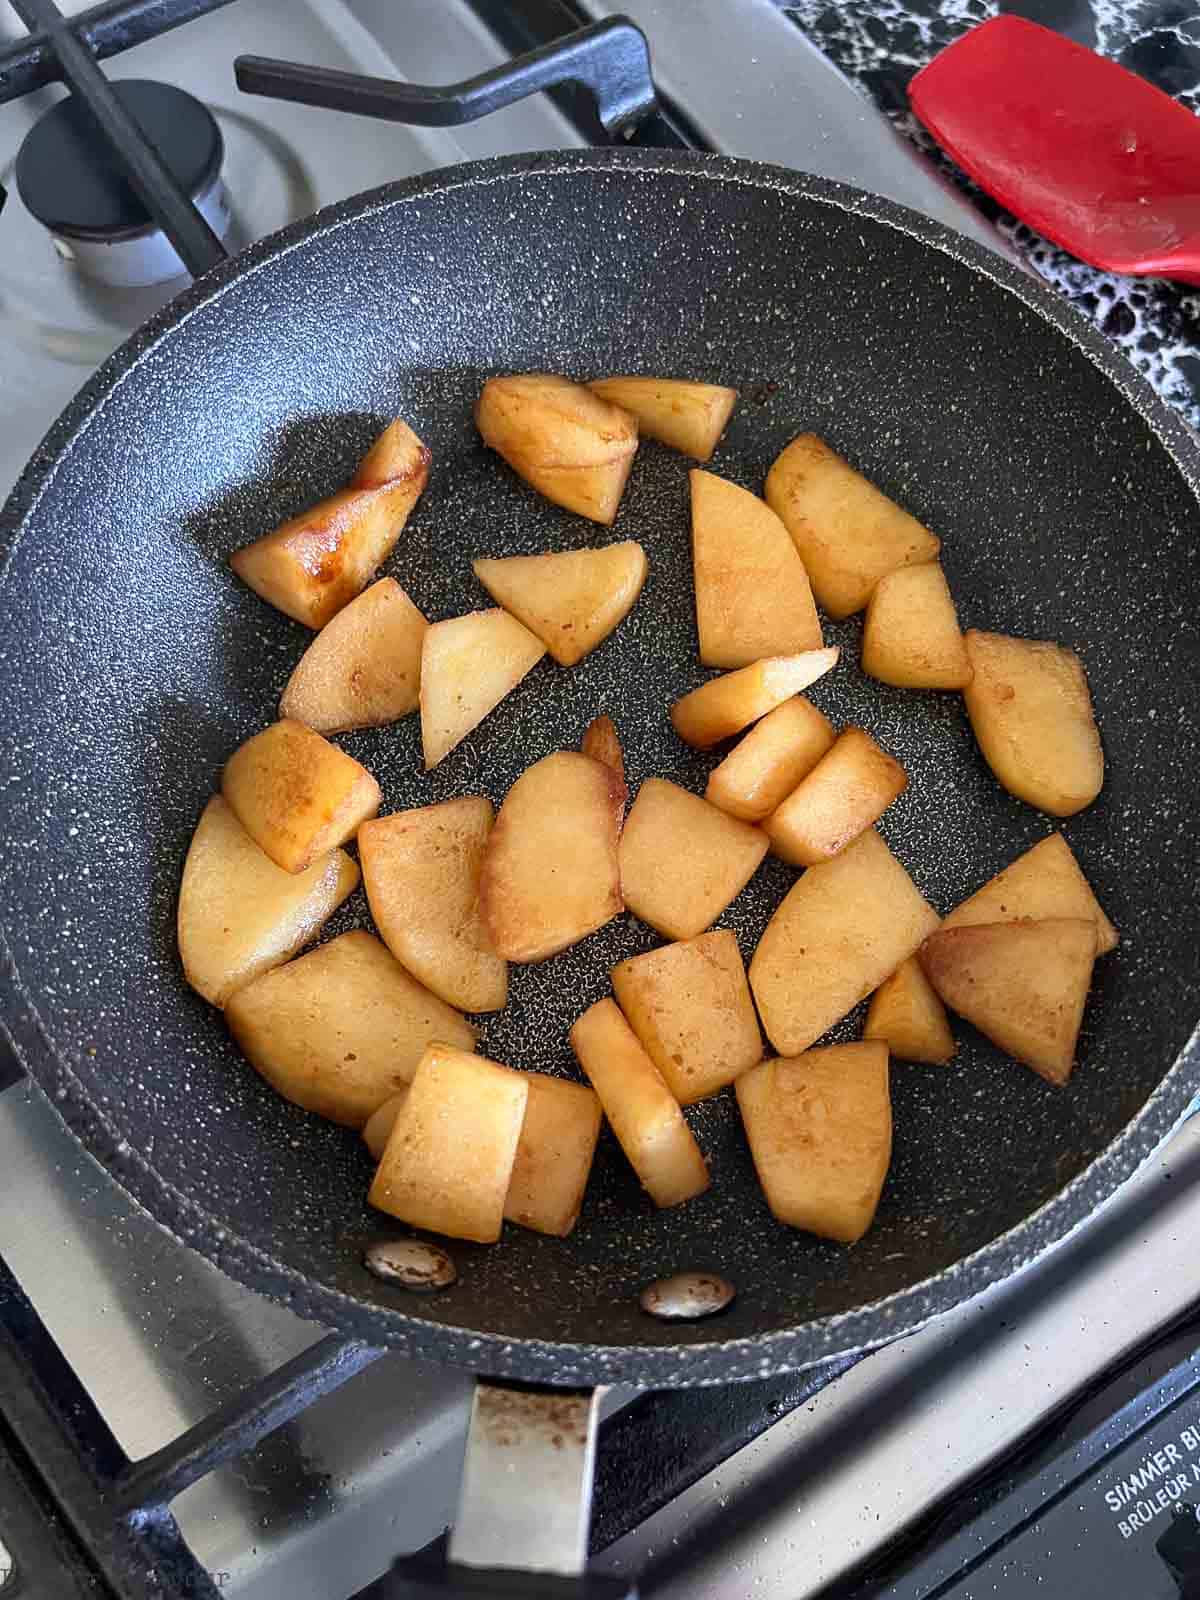 Caramelized apple pieces in a small skillet.